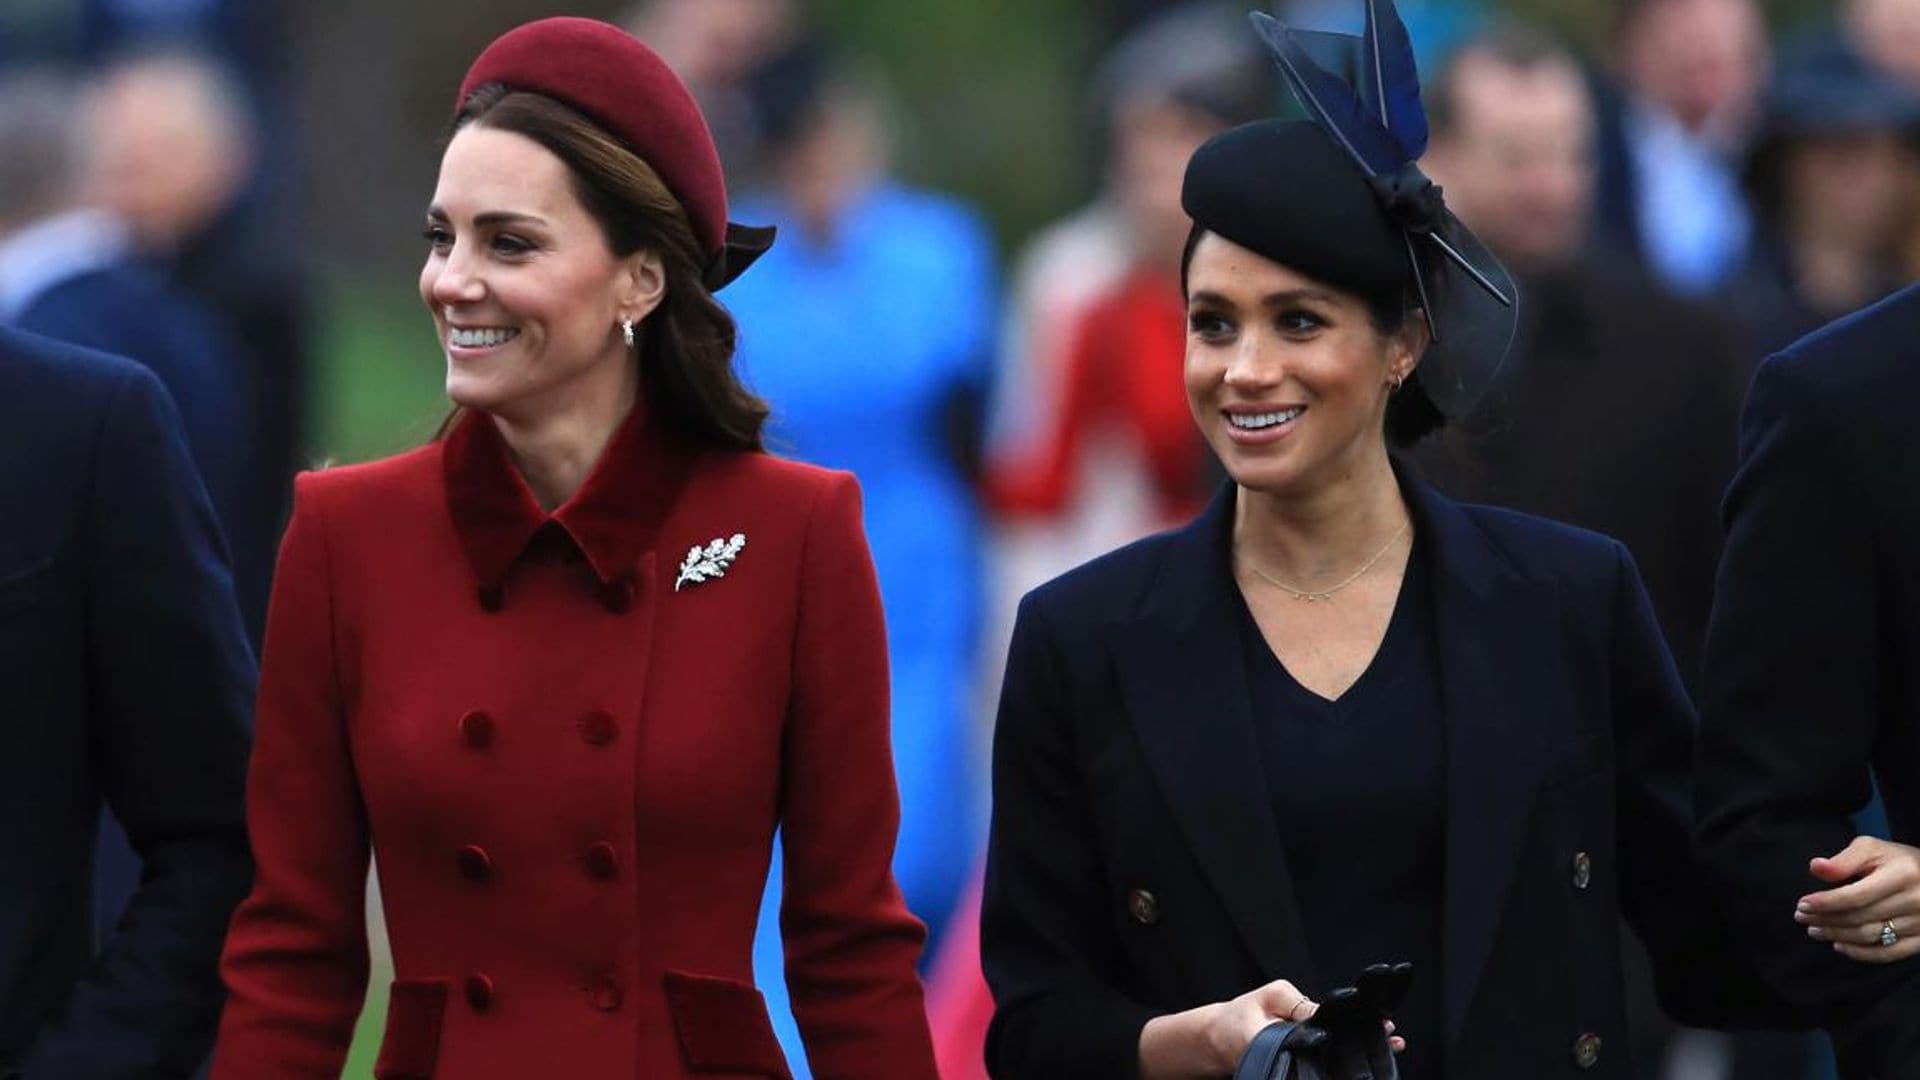 Meghan Markle to publicly reunite with Kate Middleton prior to royal exit